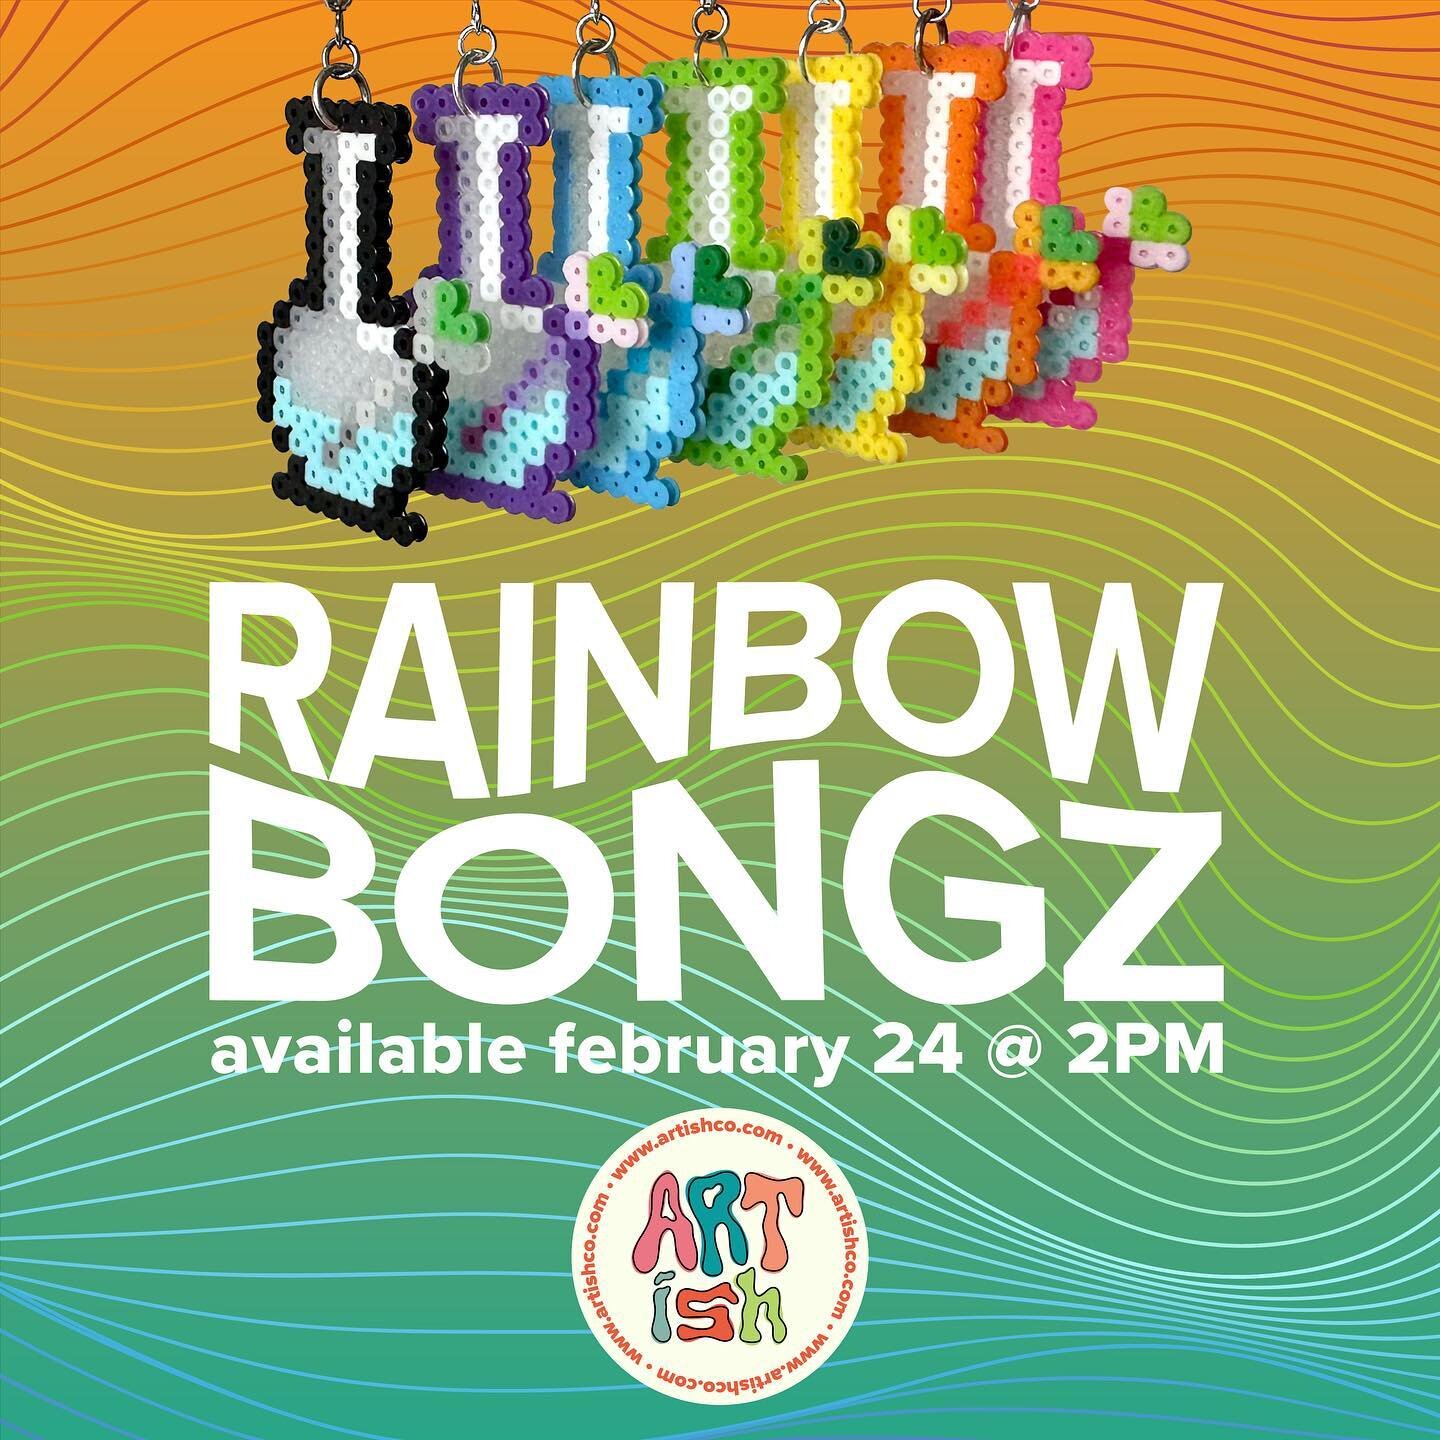 introducing collection one: rainbow bongz 🌈 

featuring 7 different colors, this collection of earrings will definitely take your jewelry game to a higher level 😌

available TOMORROW friday feb 24th at 2PM.

*all earrings are hand made to order, so